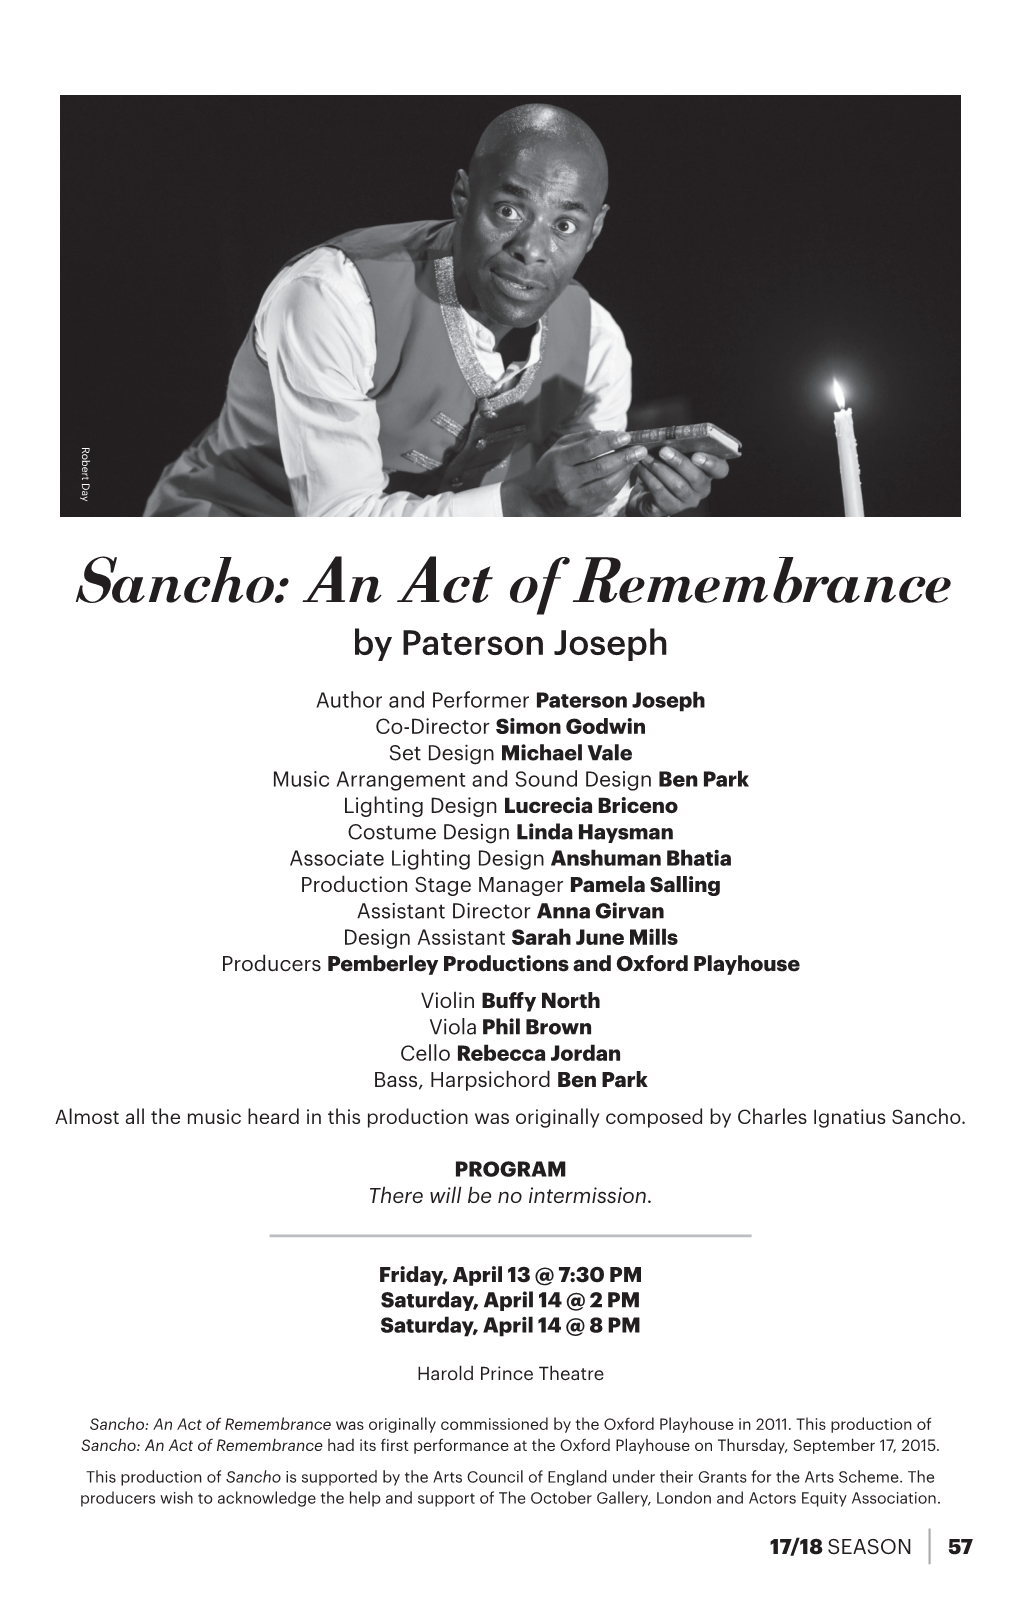 Sancho: an Act of Remembrance by Paterson Joseph